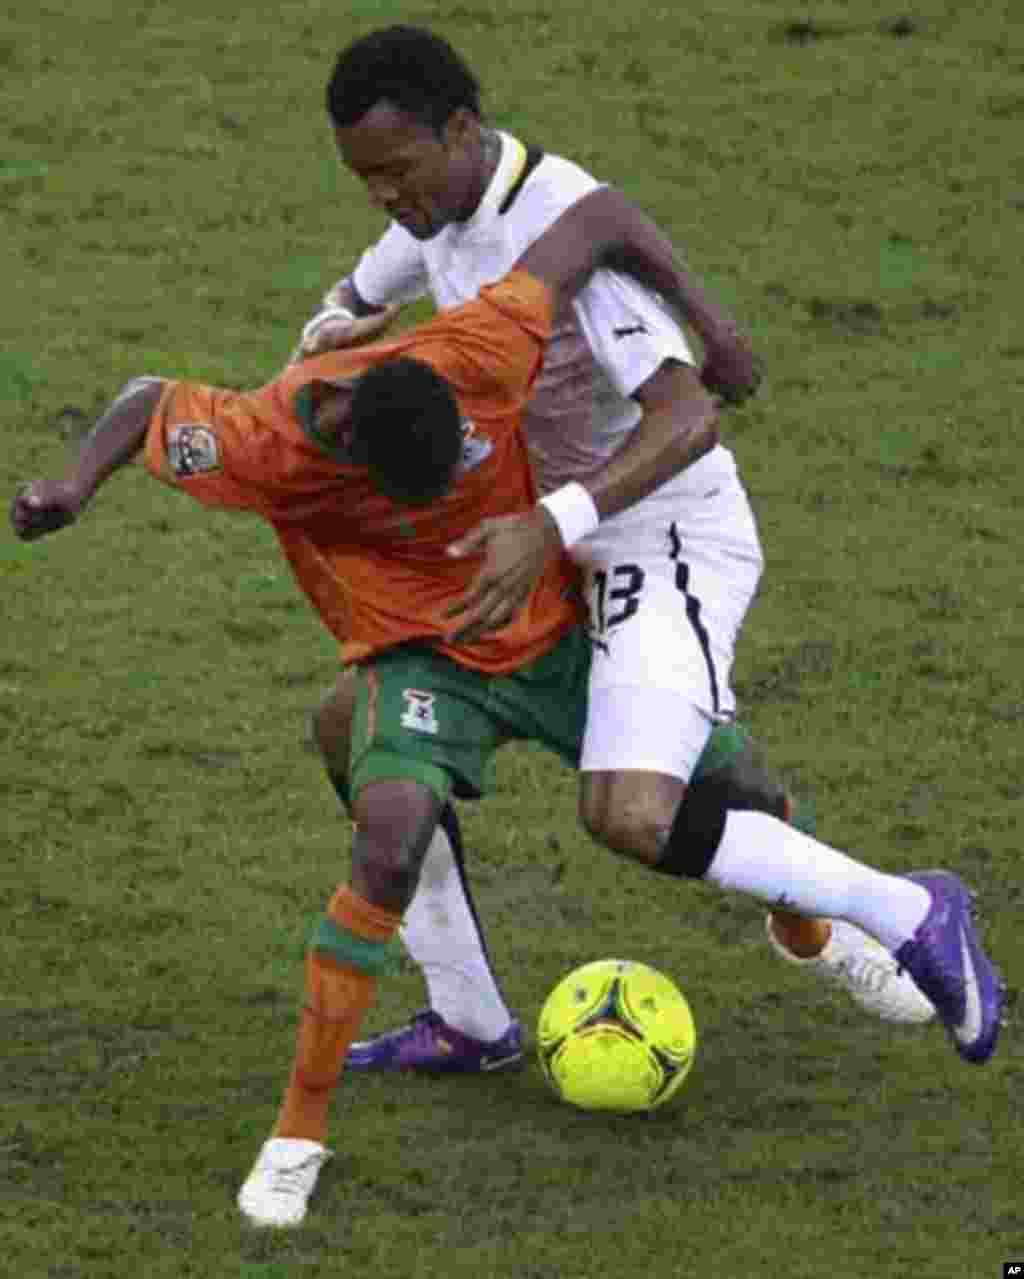 Jordan Ayew of Ghana (R) fights for the ball with Rainford Kalaba of Zambia during their African Nations Cup semi-final soccer match at Estadio de Bata "Bata Stadium" in Bata February 8, 2012.